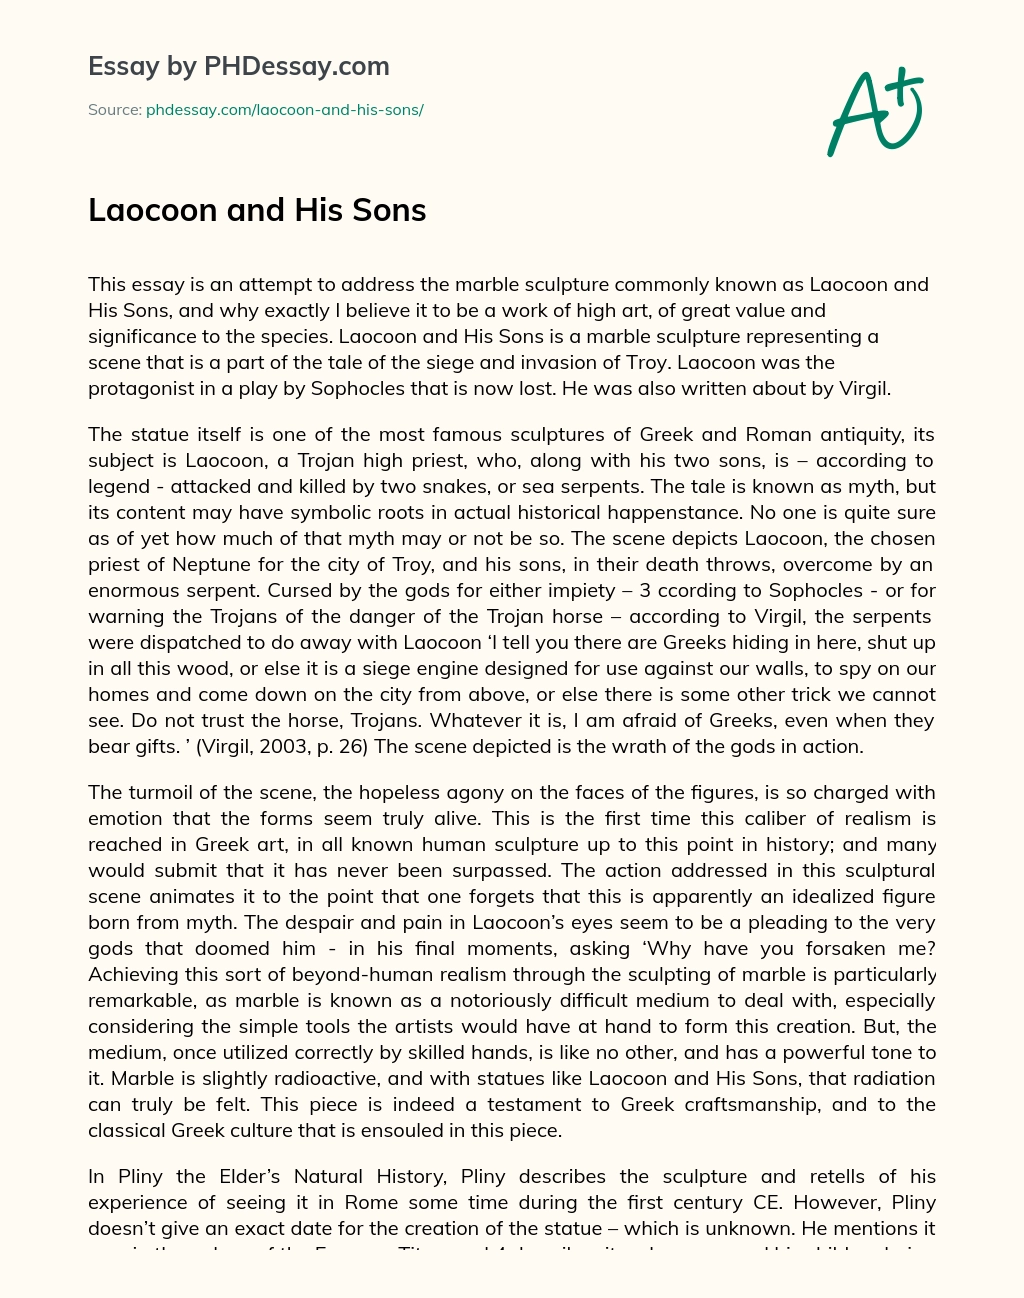 Laocoon and His Sons essay